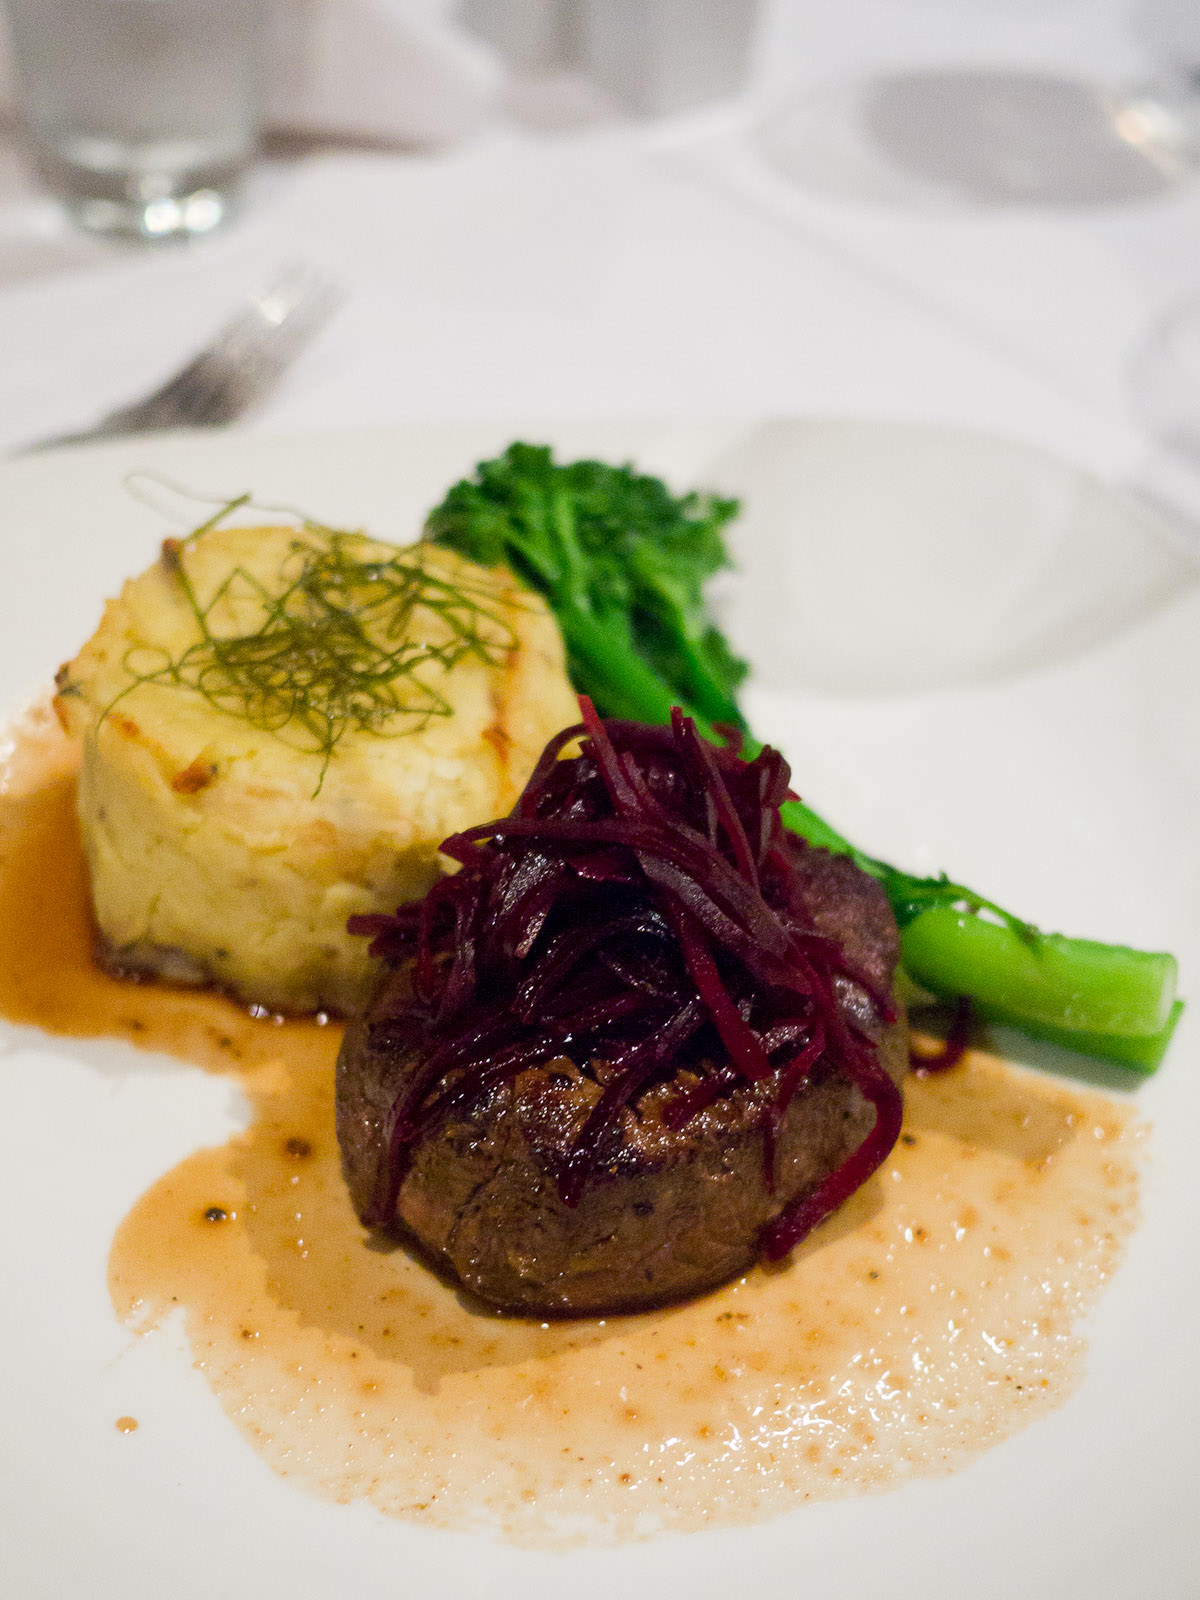 250g eye fillet with cabernet merlot jus, potato rösti scented with thyme, garlic buttered broccolini and beetroot pickles